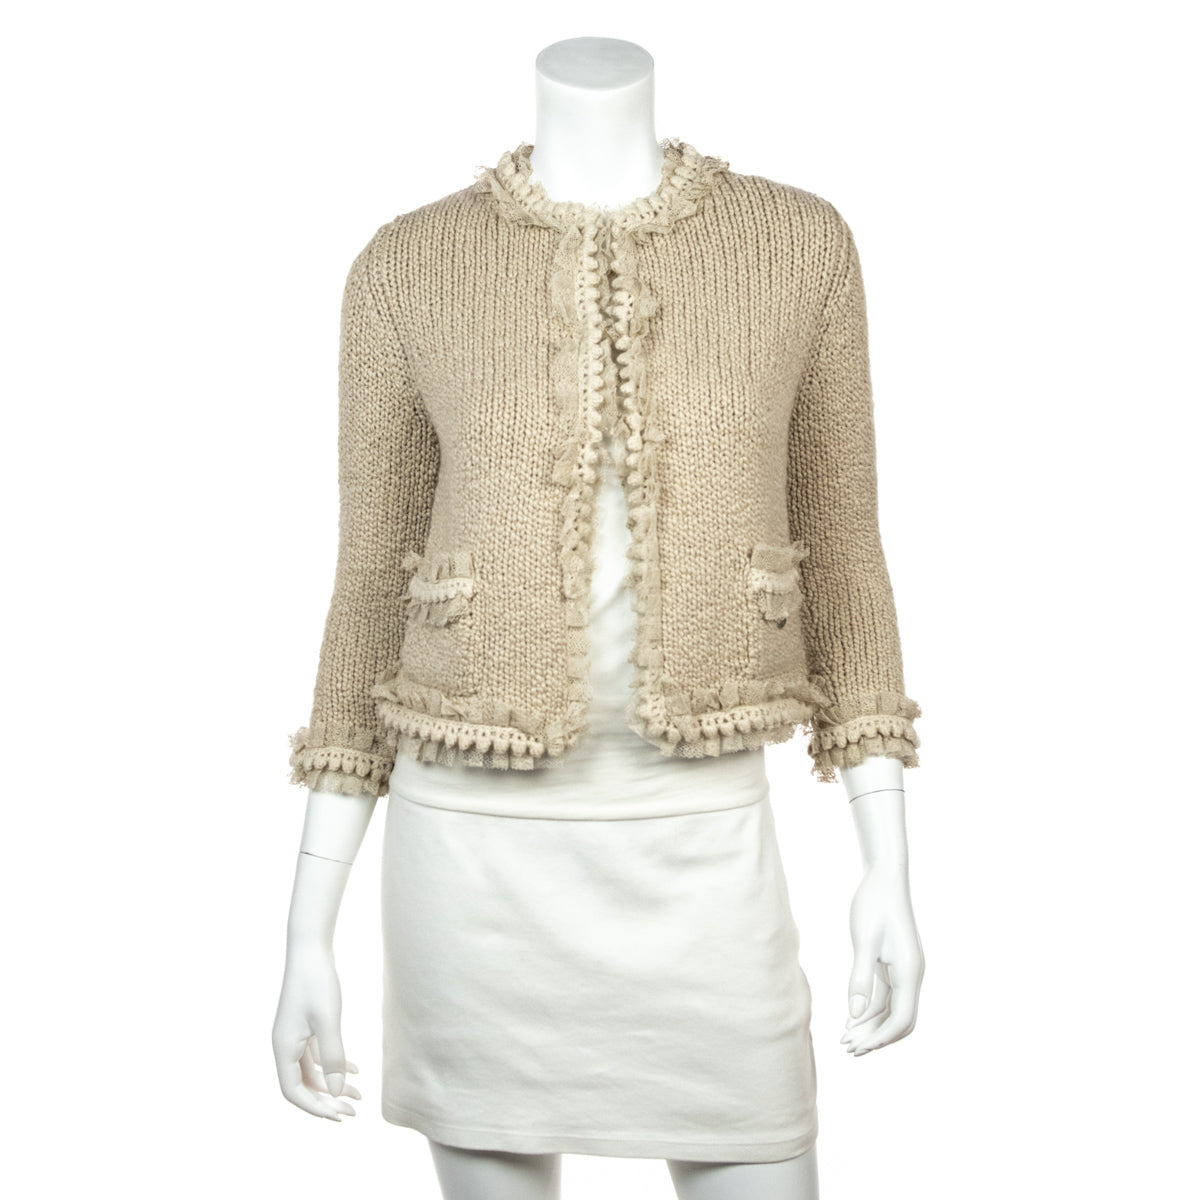 Chanel Beige Cashmere Knit Lace Embellished Jacket Size S | US 6 | FR 38 - Love that Bag etc - Preowned Authentic Designer Handbags & Preloved Fashions